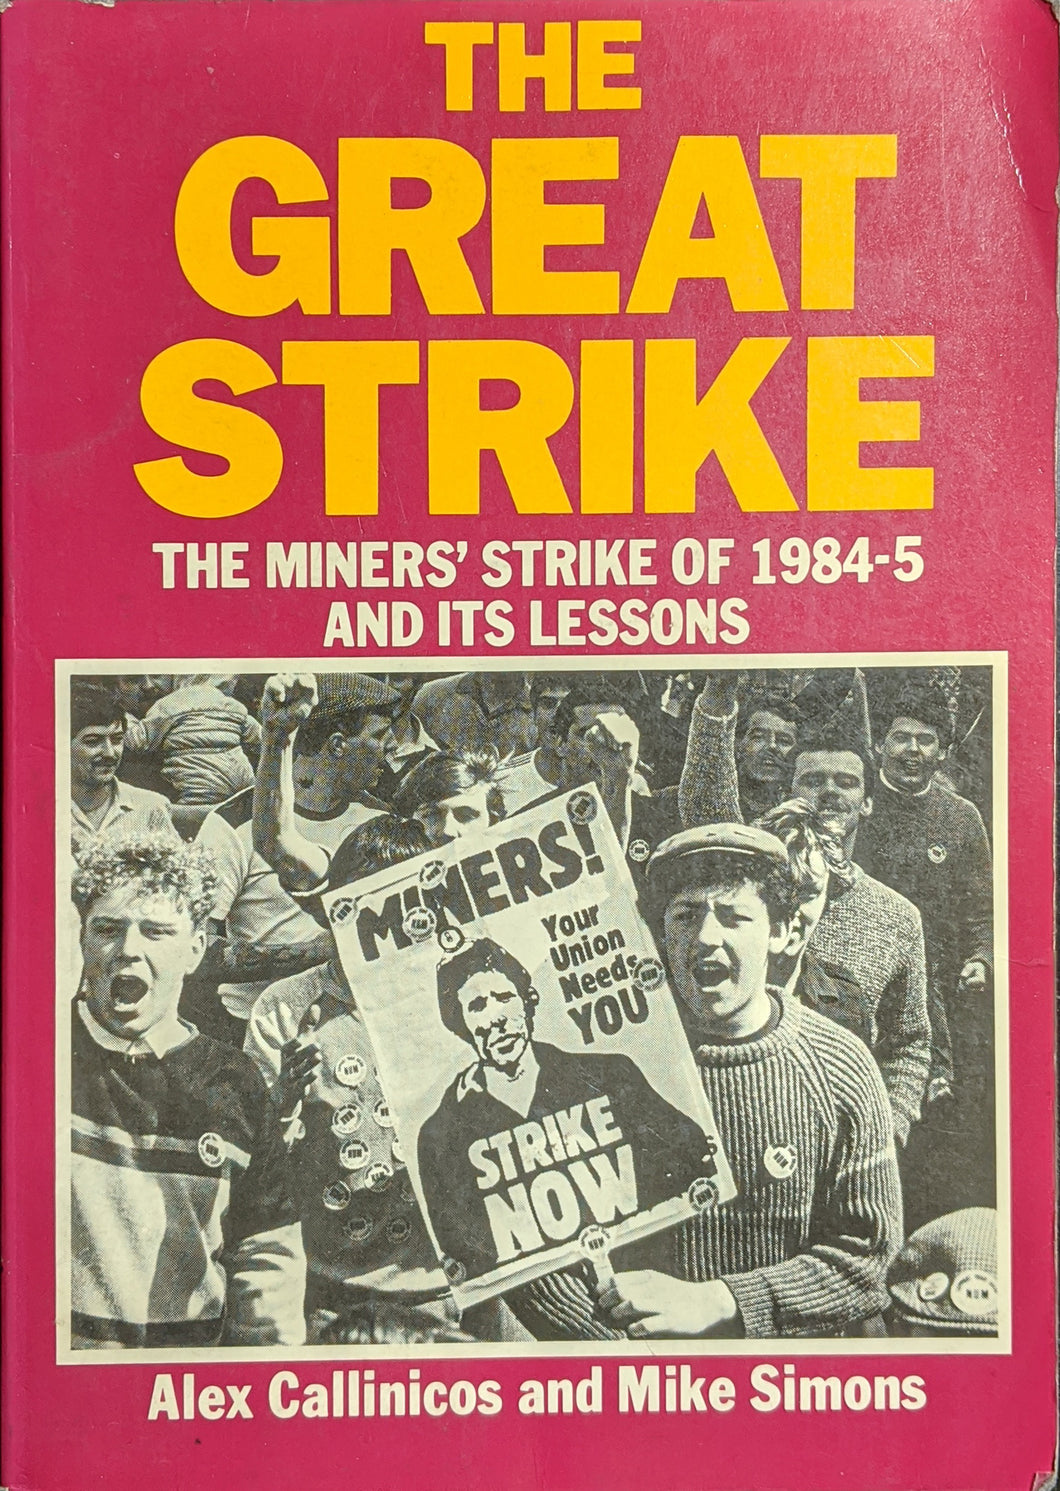 The Great Strike: The Miners' Strike of 1984-5 and its Lessons